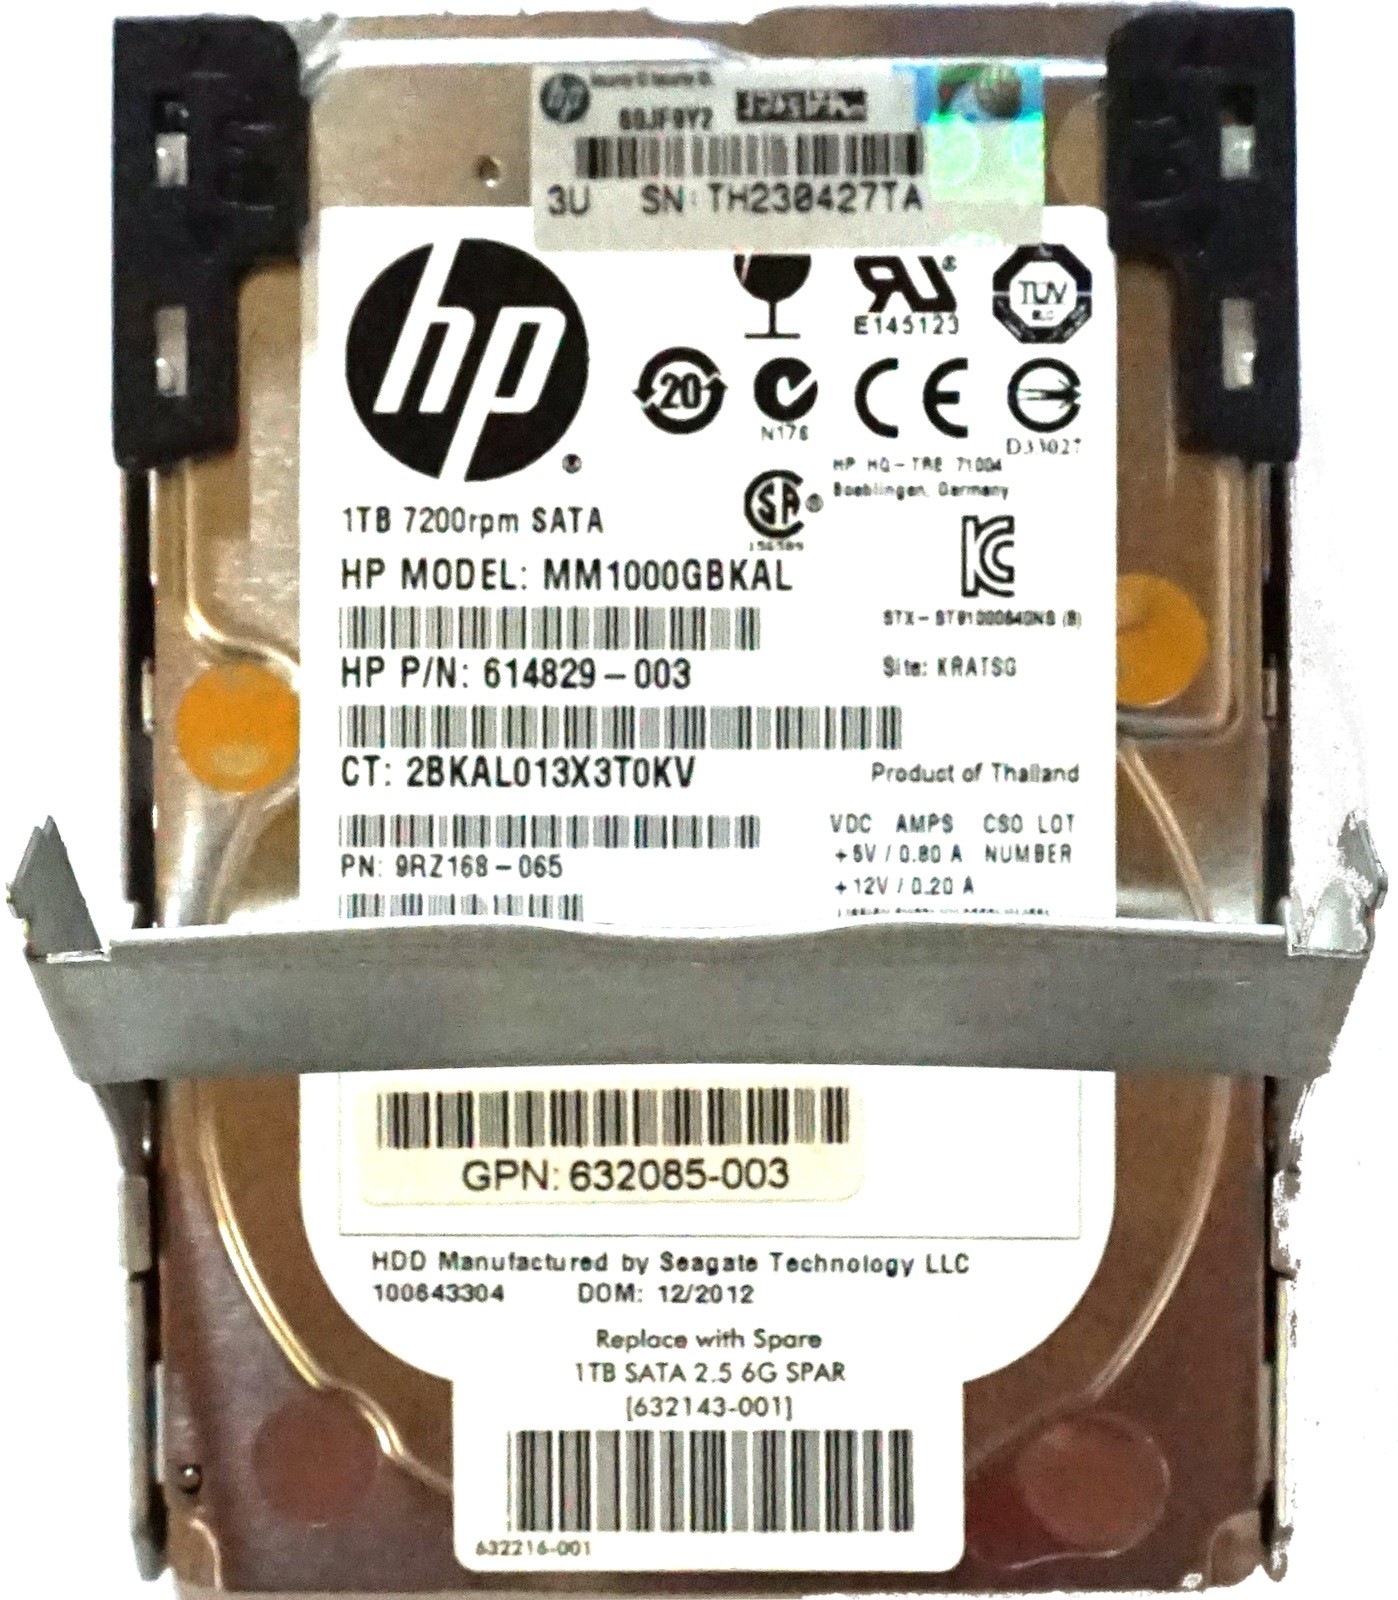 HP (614829-003) 1TB SATA-III (2.5") 6Gbps 7.2K HDD in Quick-Release Caddy